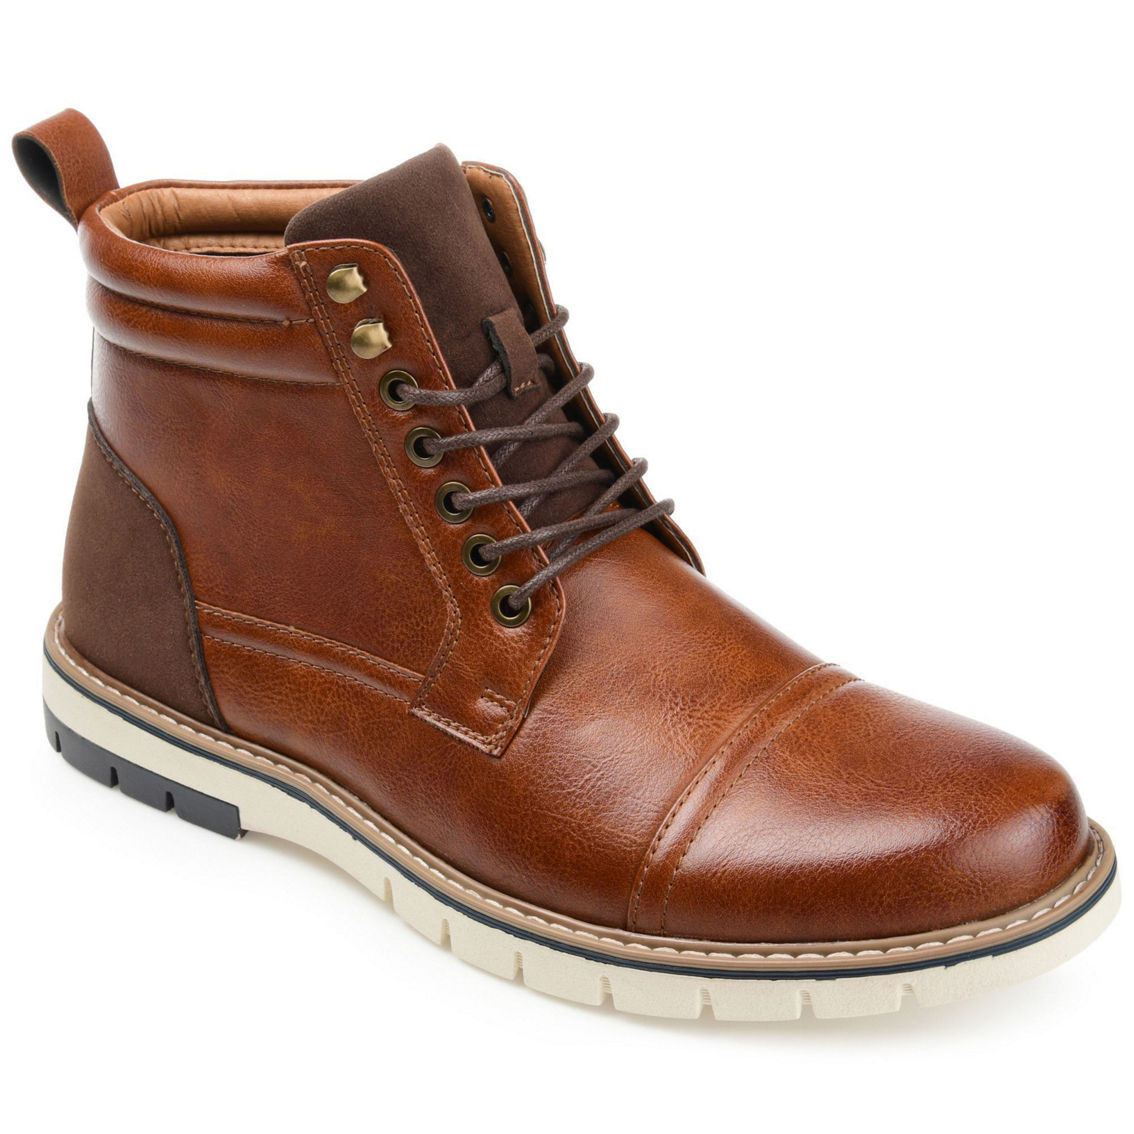 Vance Co. Lucien Cap Toe Ankle Boot - Image 1 of 2